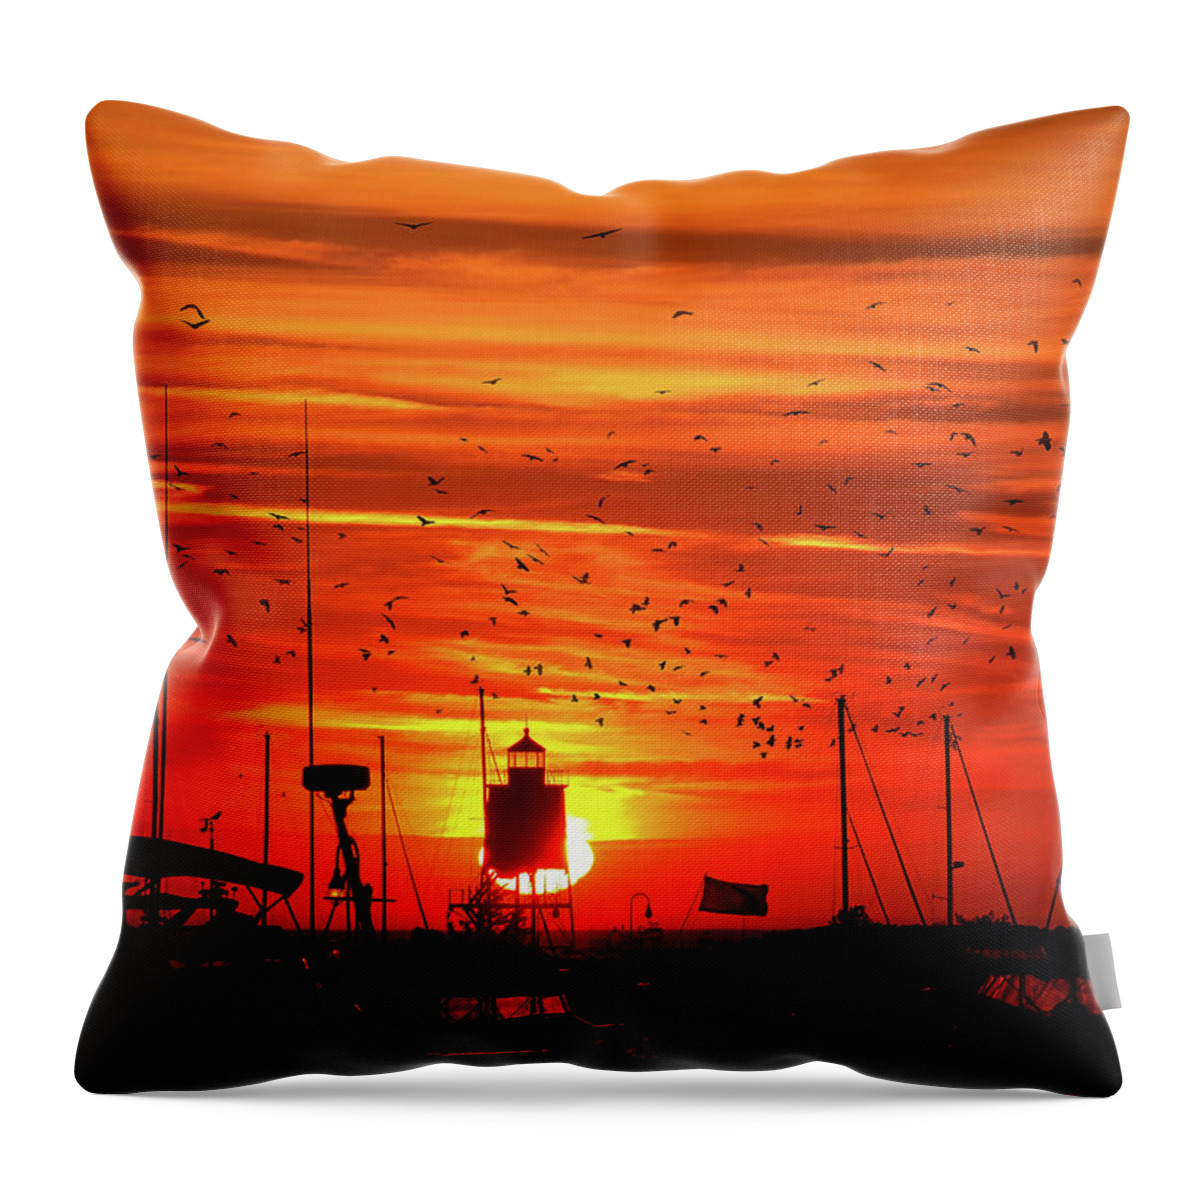 Reef Point Throw Pillow featuring the photograph Reef Point Sunrise by Scott Olsen